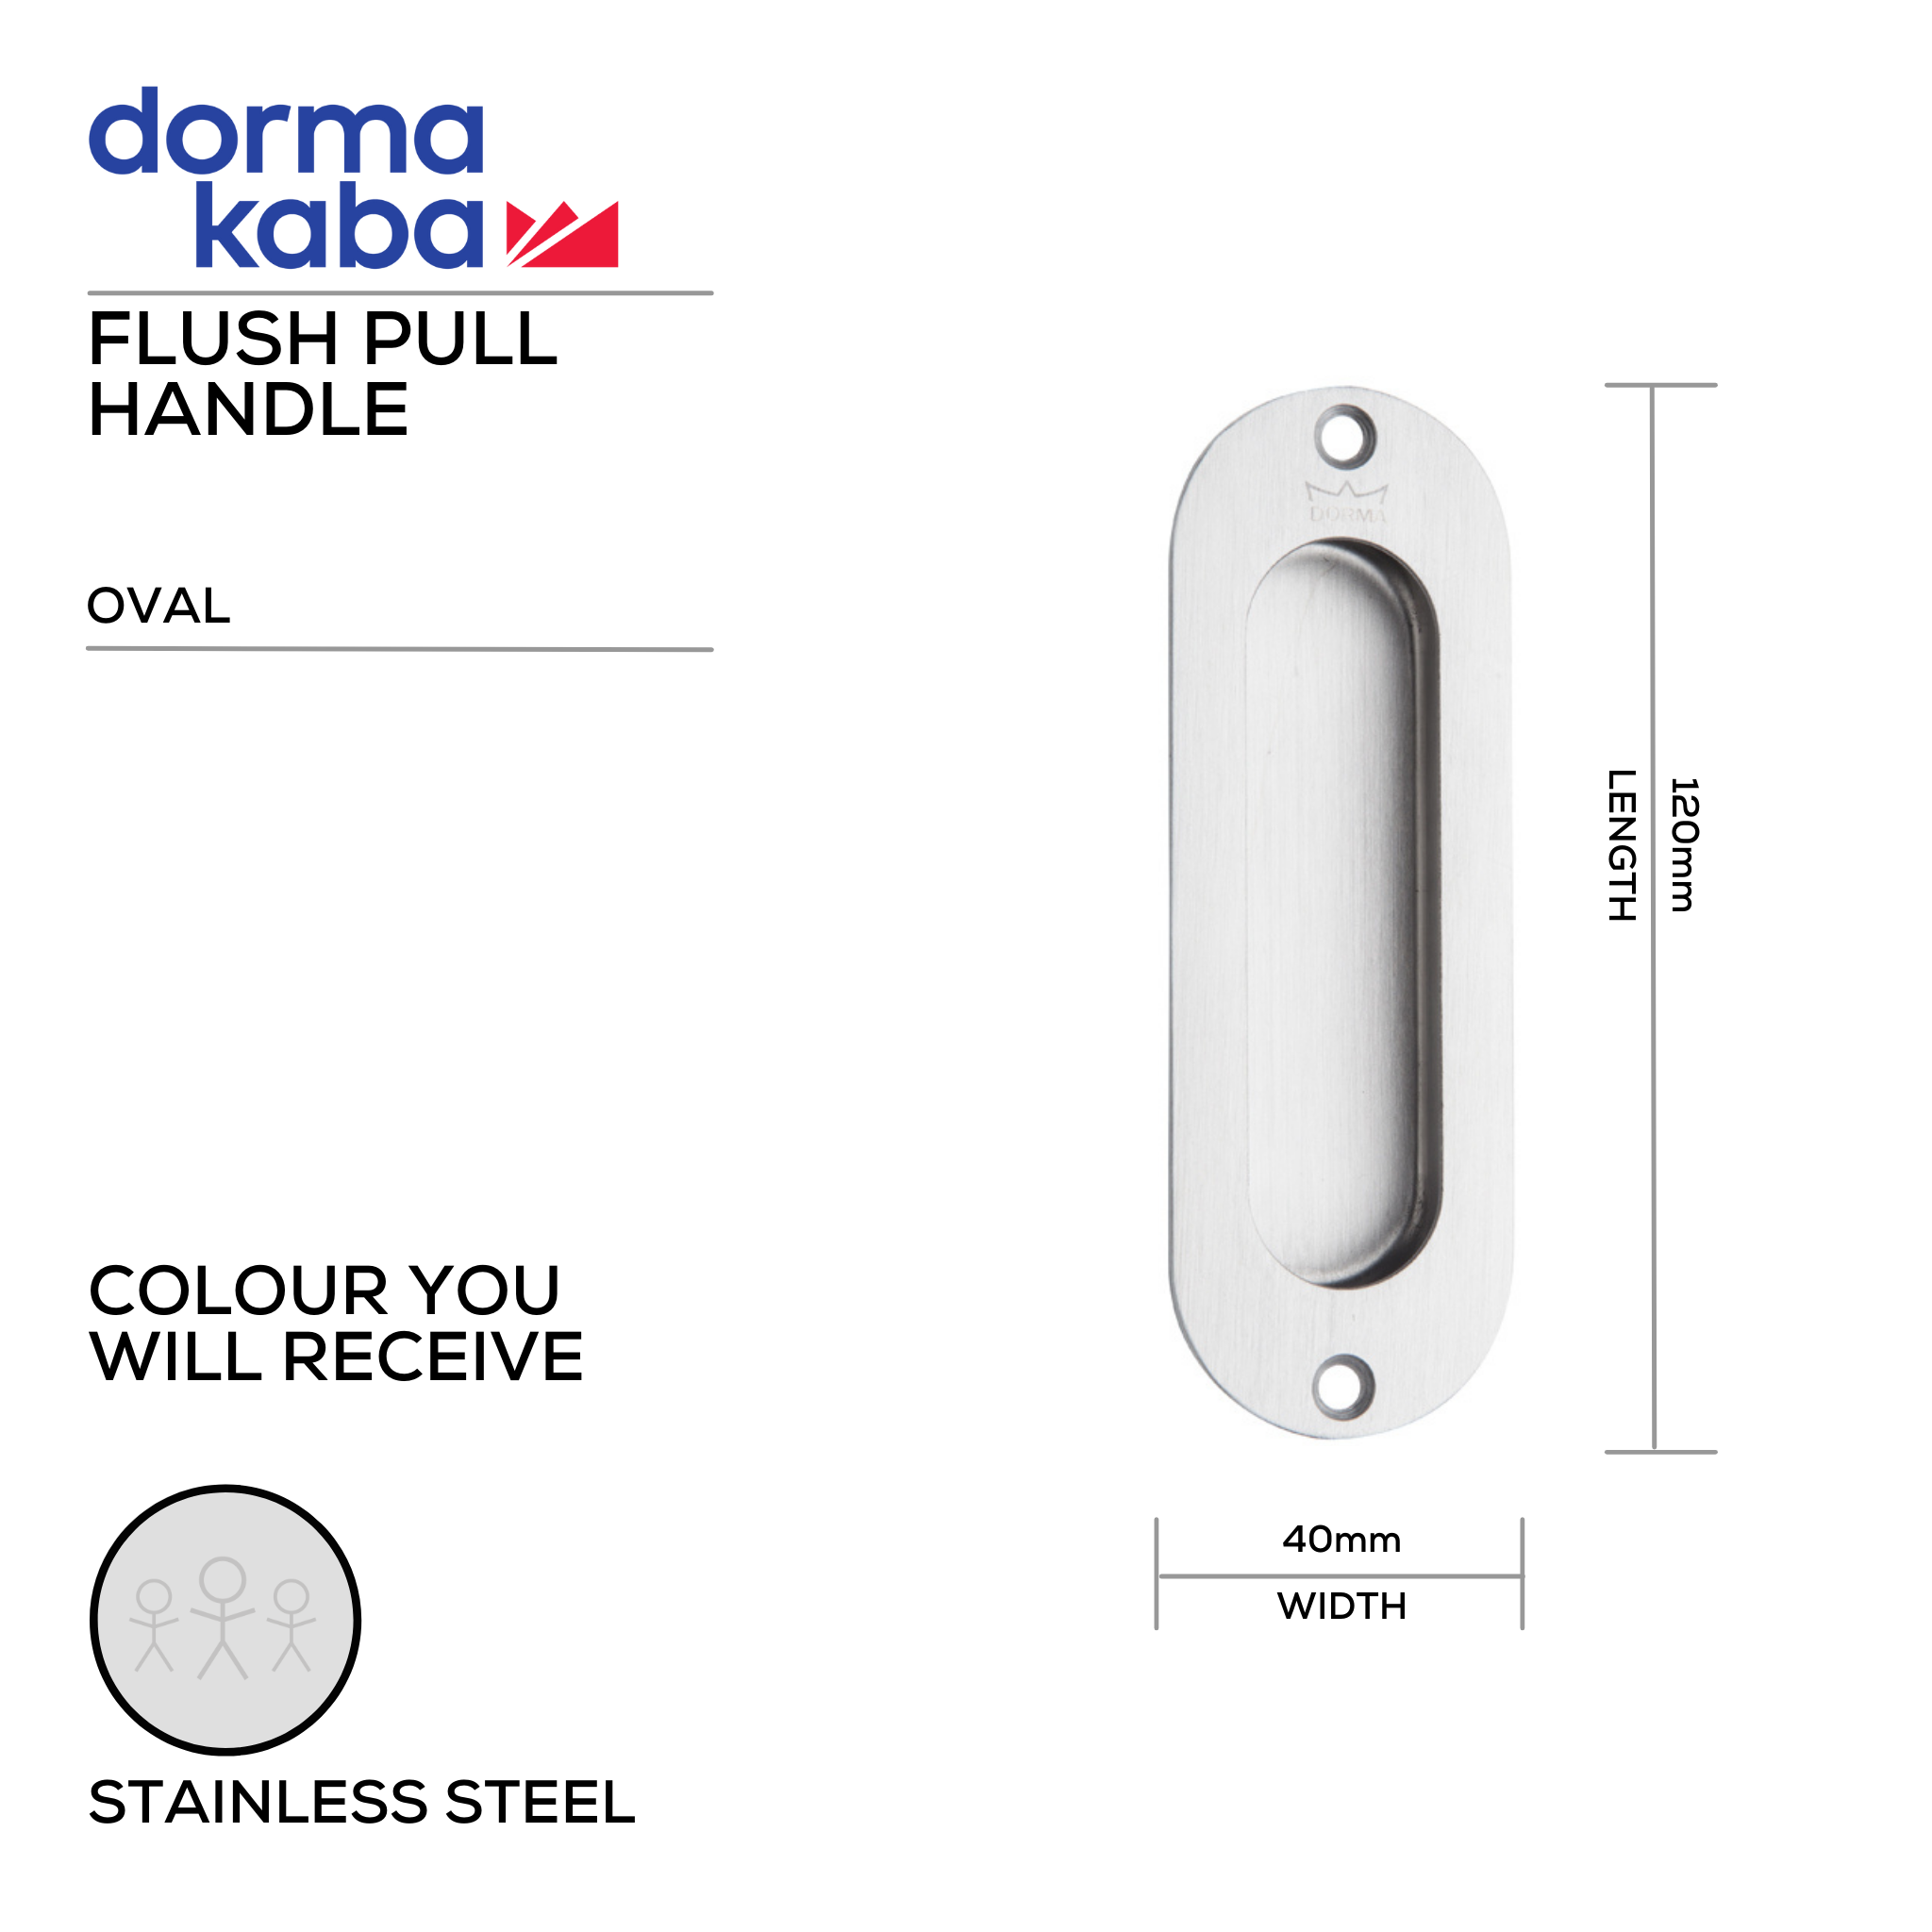 DFP-SS-024, Pull Handle, Recessed, Flush, Oval, 120mm (l) x 40mm (w), Stainless Steel, DORMAKABA